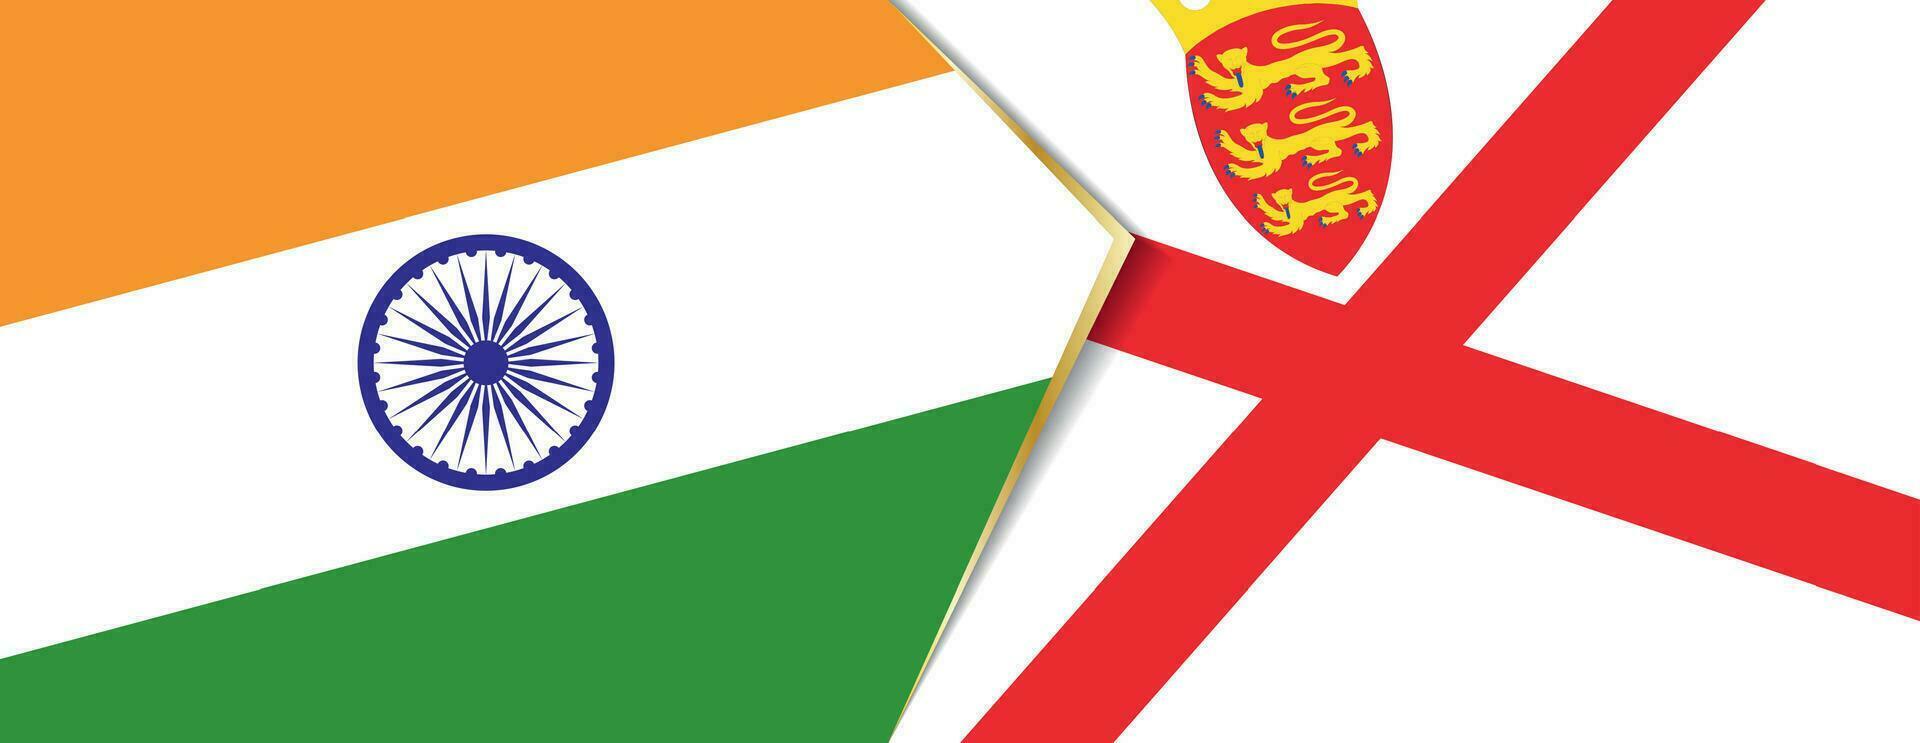 India and Jersey flags, two vector flags.